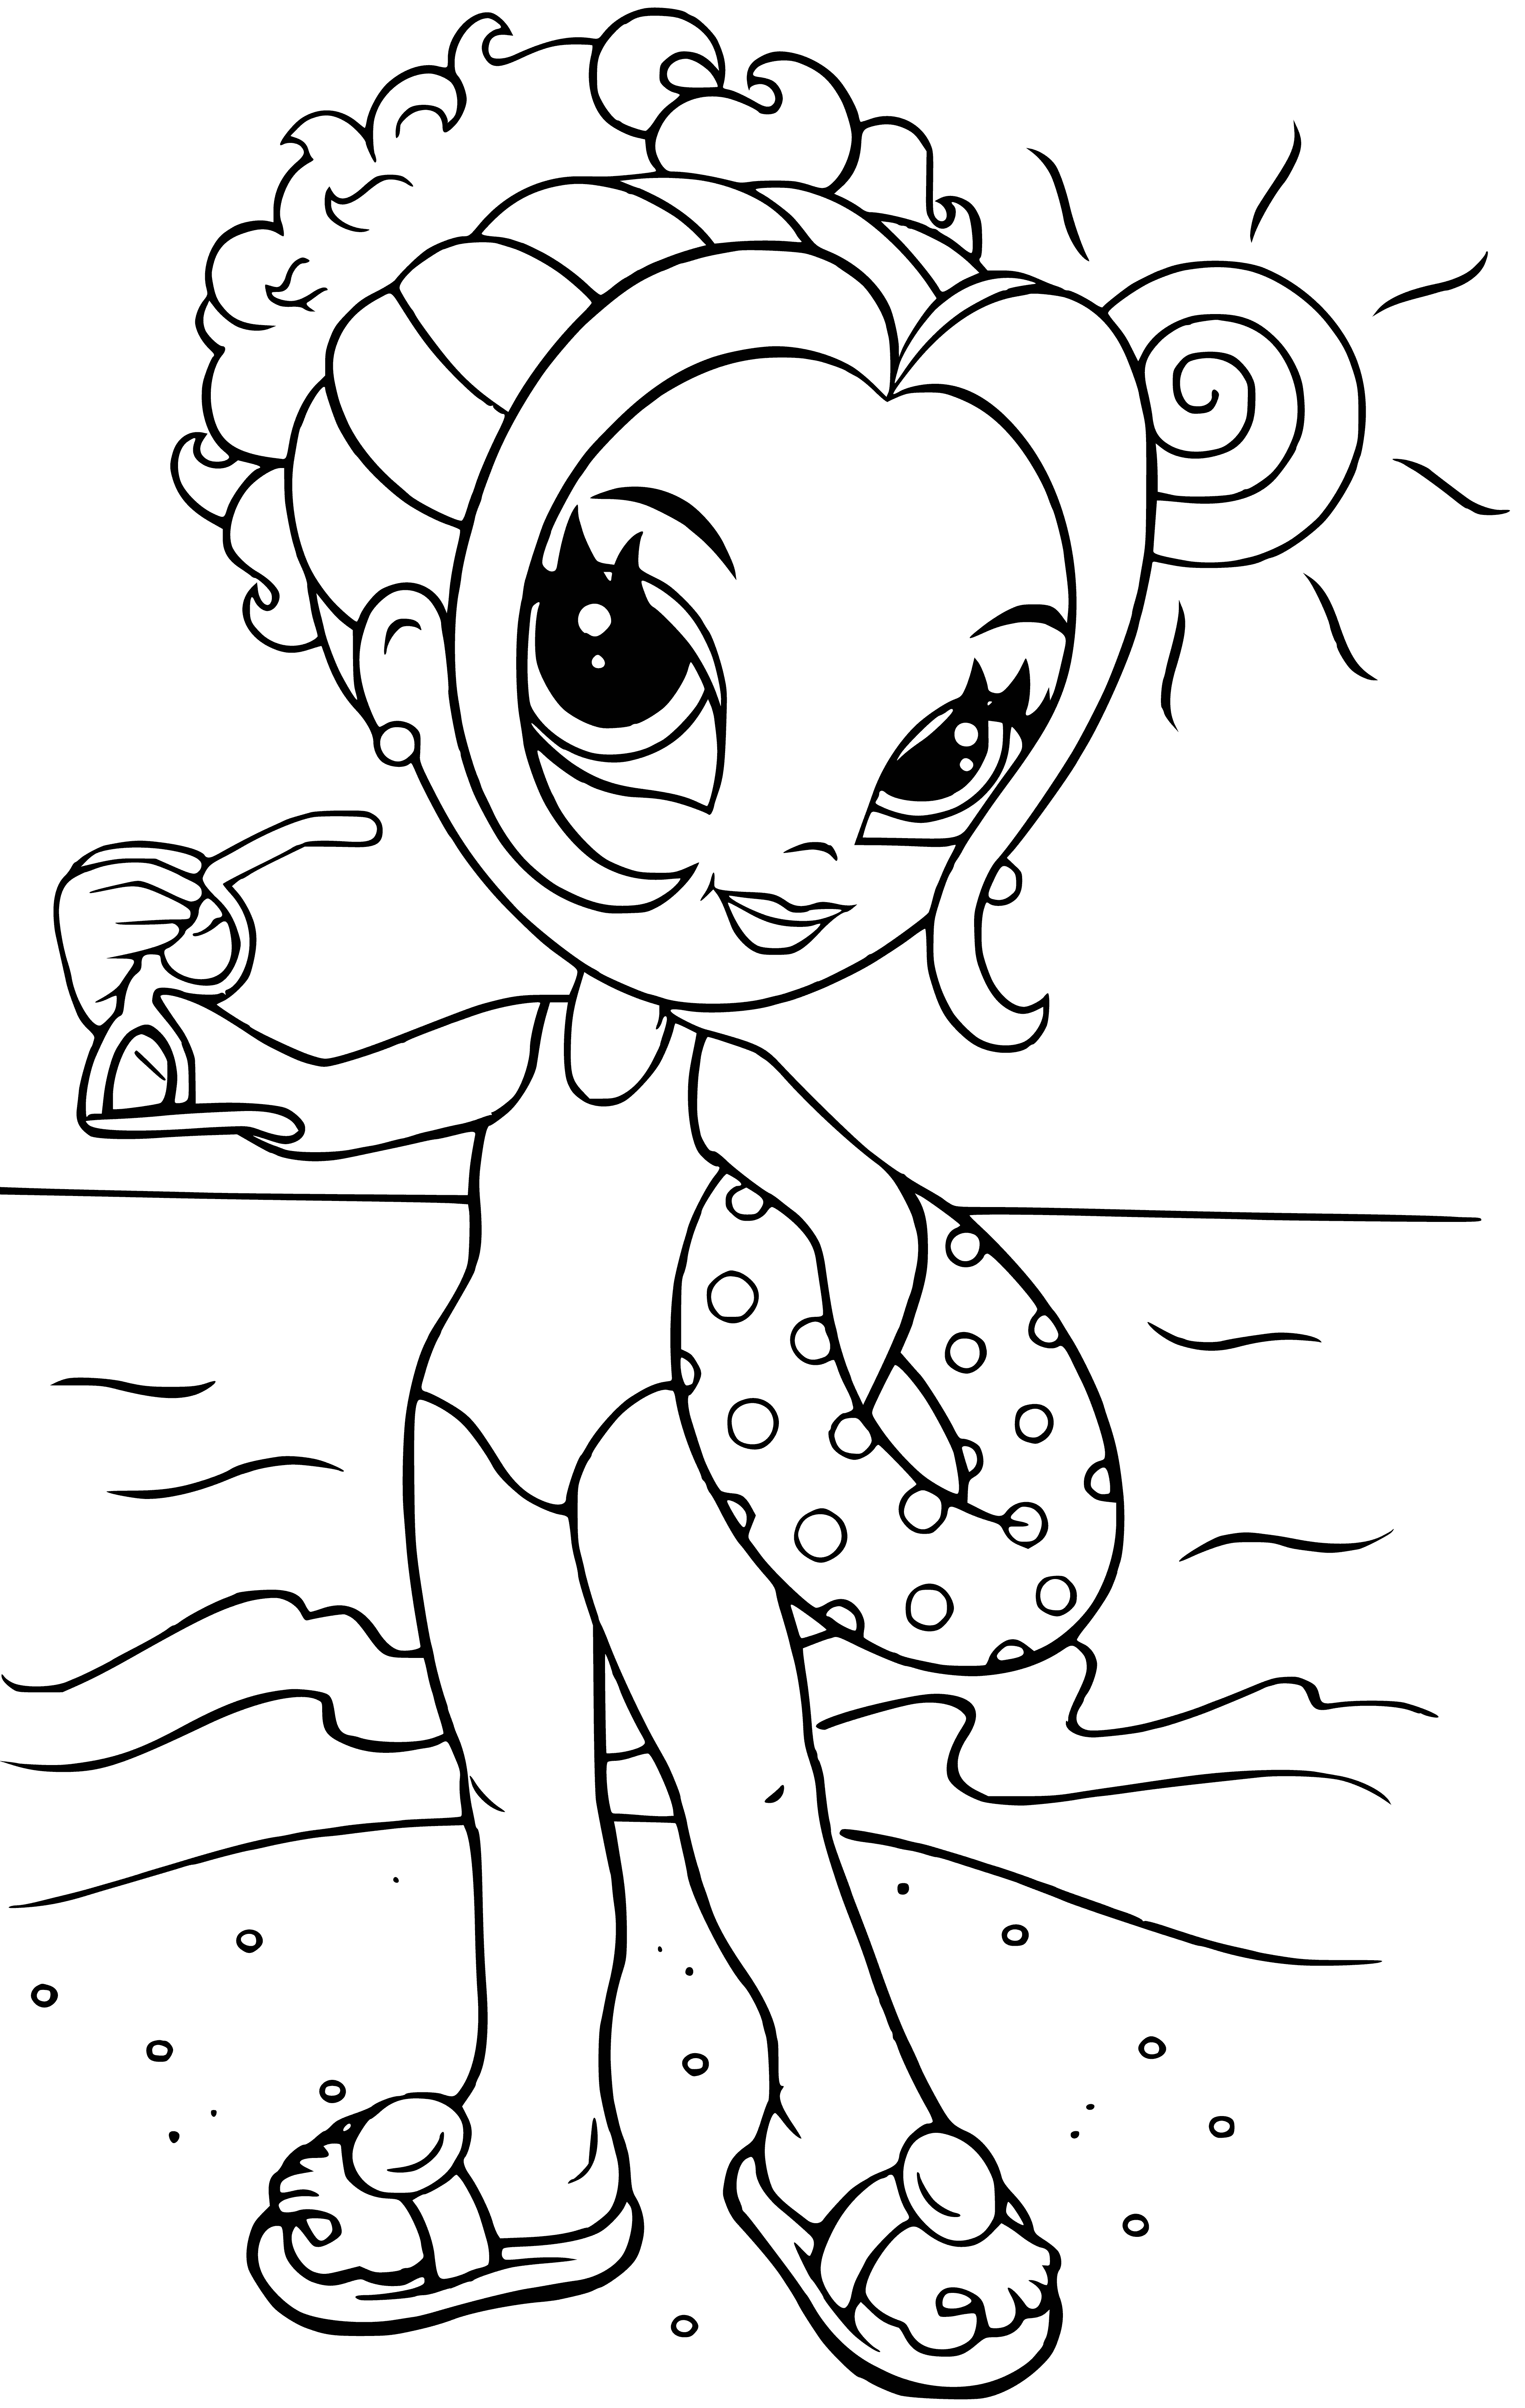 coloring page: Glam girl ready for a night on the town with sequined dress, high heels, manicured nails & perfect hair. #GlamLife